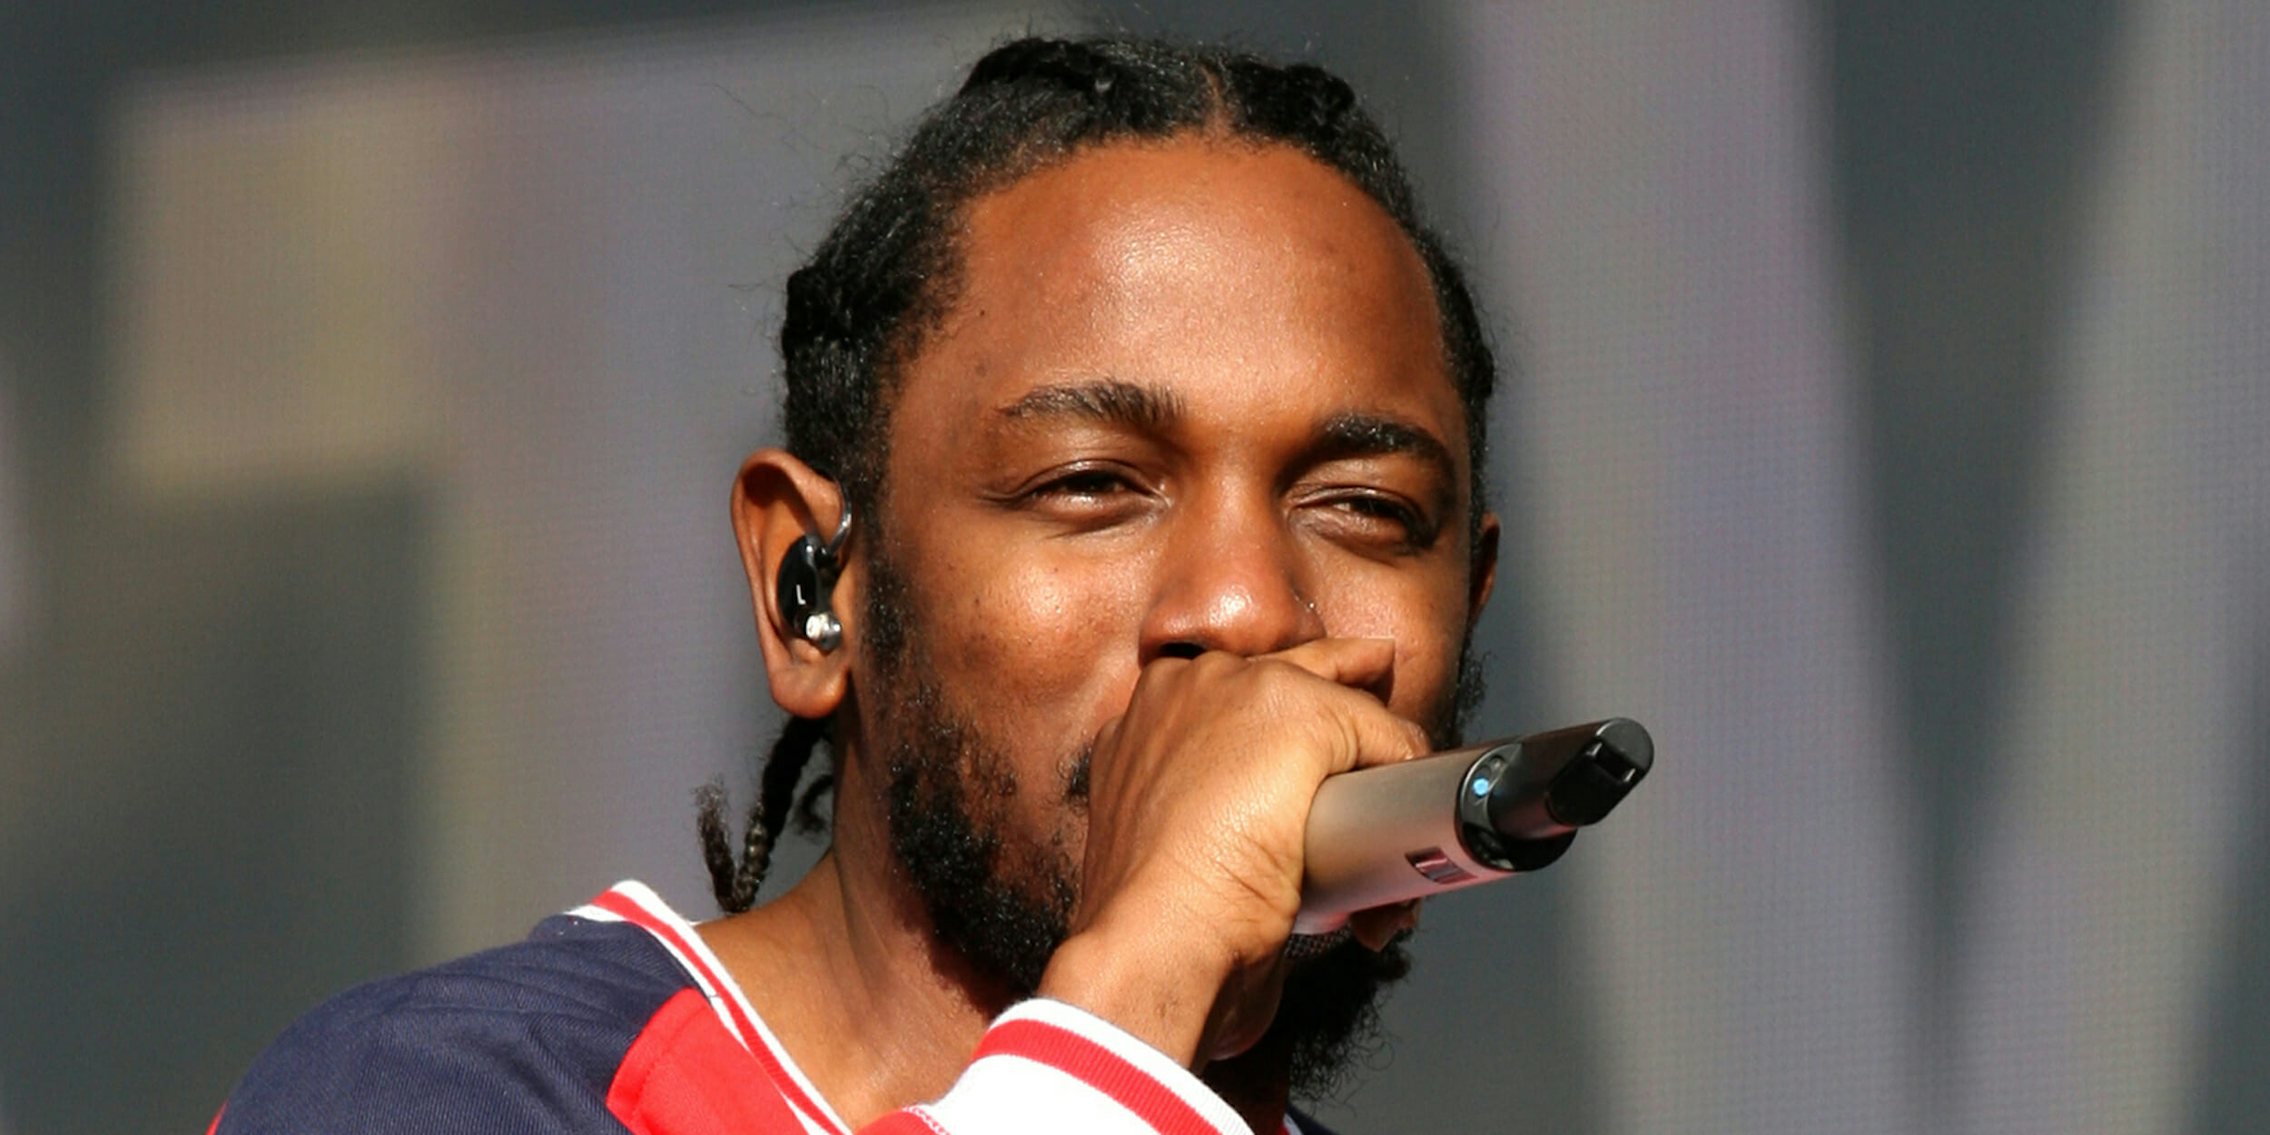 Kendrick Lamar on stage with a microphone, DAMN.